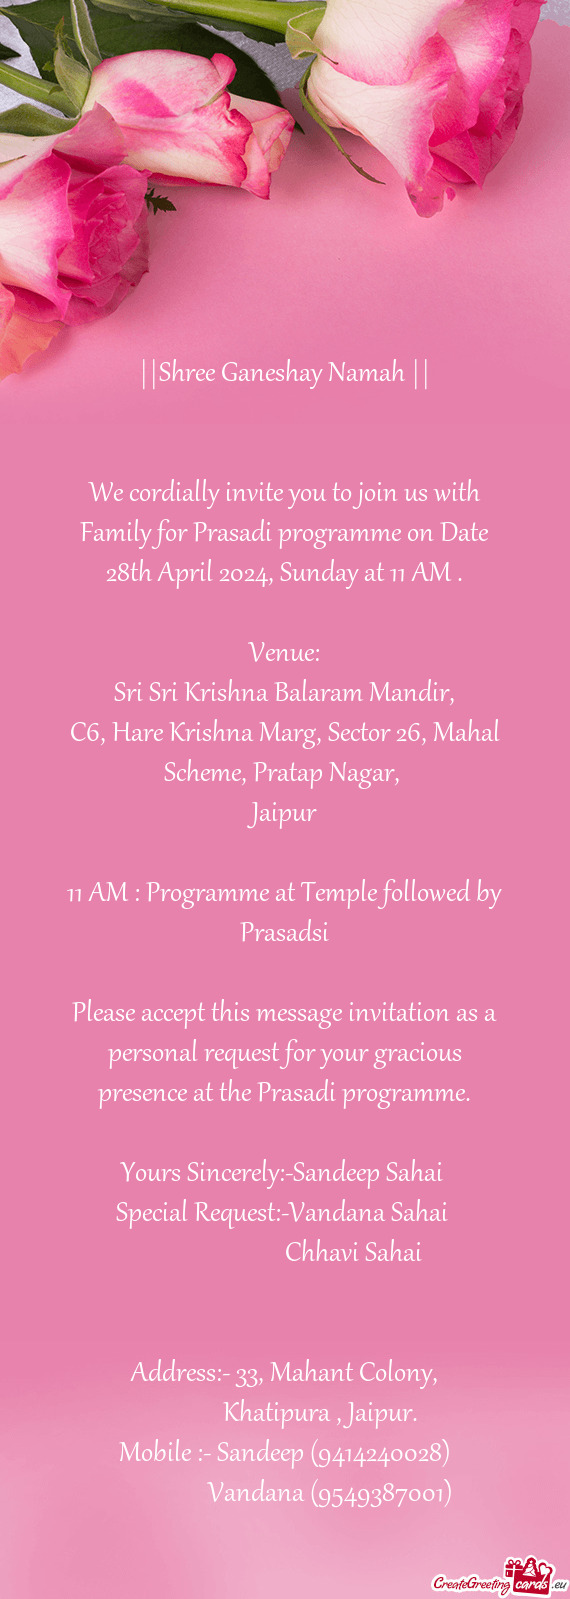 We cordially invite you to join us with Family for Prasadi programme on Date 28th April 2024, Sunday